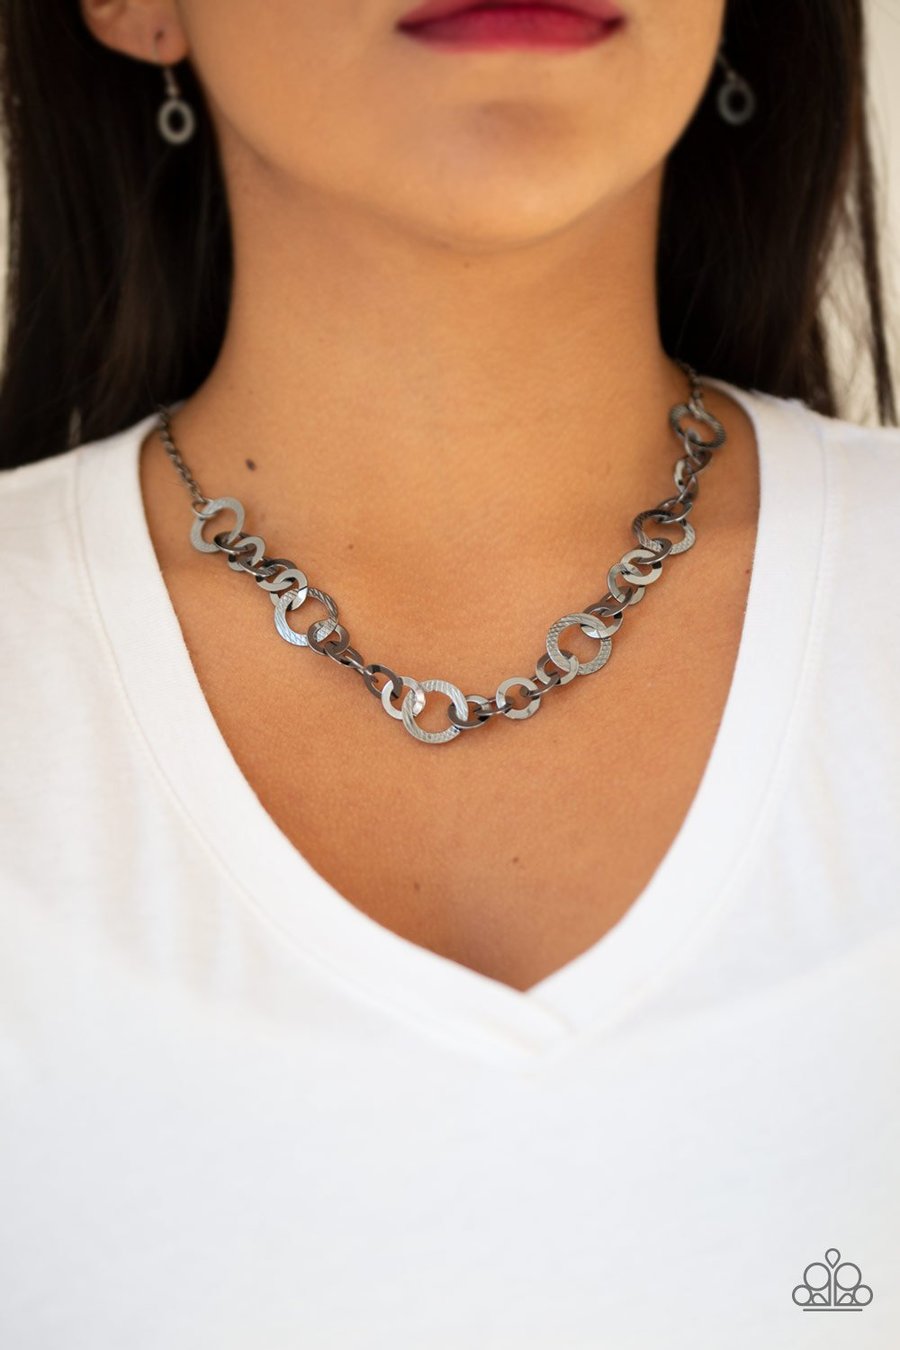 Paparazzi Accessories - Move It On Over - Black (Gunmetal) Necklace